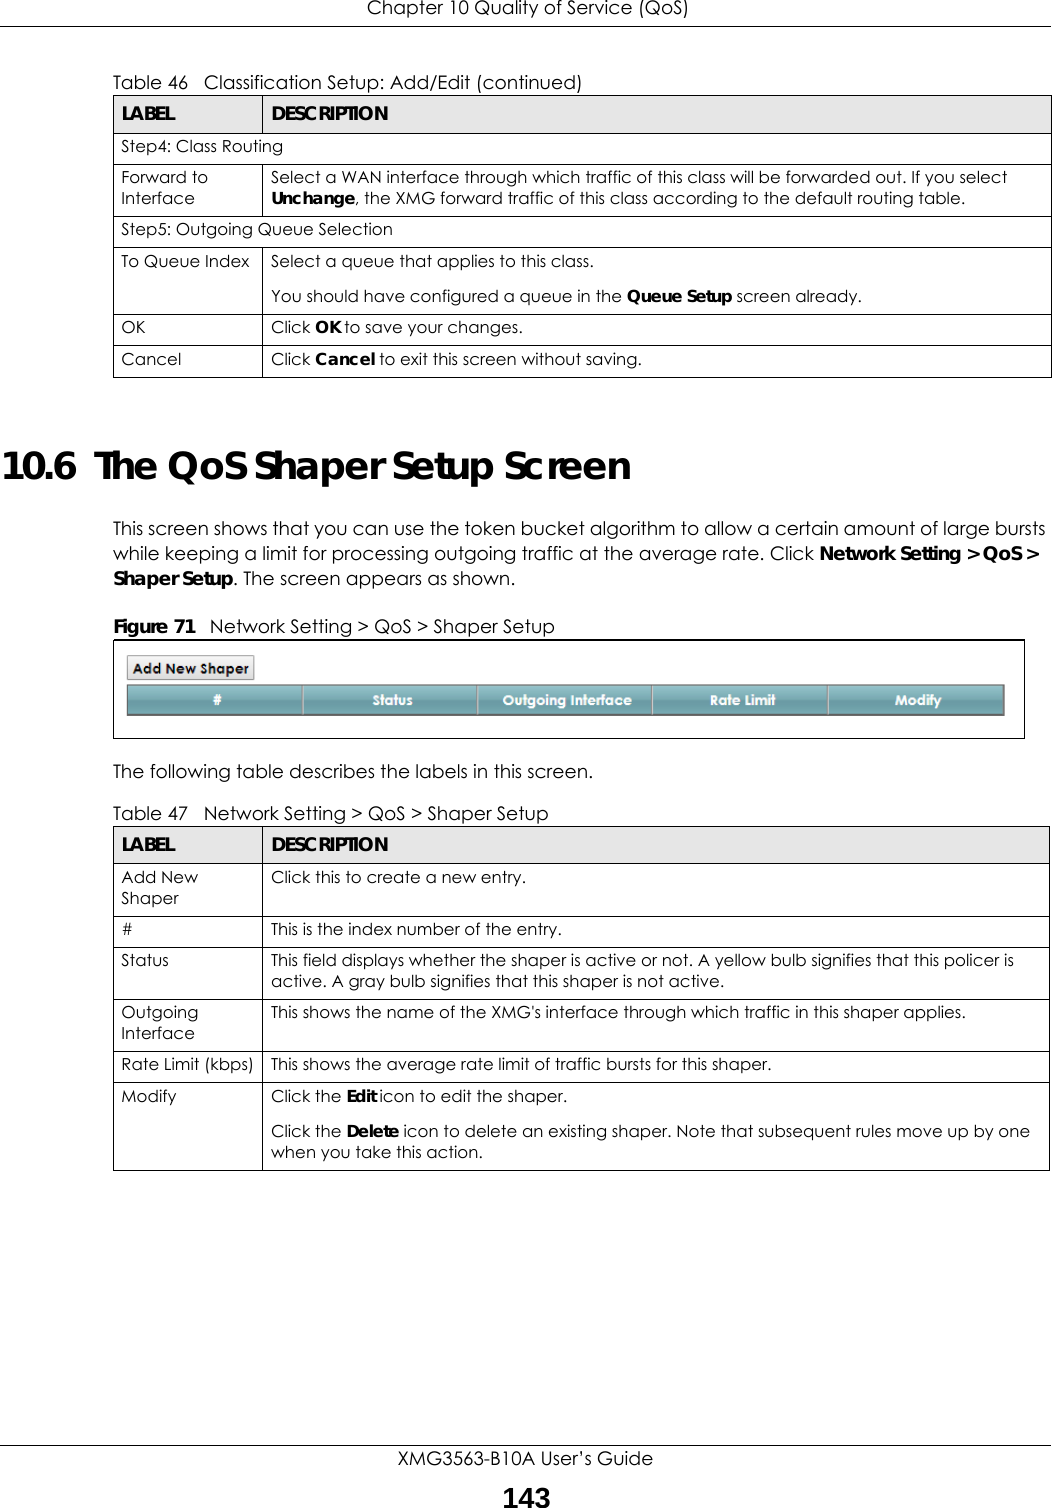  Chapter 10 Quality of Service (QoS)XMG3563-B10A User’s Guide14310.6  The QoS Shaper Setup ScreenThis screen shows that you can use the token bucket algorithm to allow a certain amount of large bursts while keeping a limit for processing outgoing traffic at the average rate. Click Network Setting &gt; QoS &gt; Shaper Setup. The screen appears as shown. Figure 71   Network Setting &gt; QoS &gt; Shaper Setup The following table describes the labels in this screen.  Step4: Class RoutingForward to InterfaceSelect a WAN interface through which traffic of this class will be forwarded out. If you select Unchange, the XMG forward traffic of this class according to the default routing table.Step5: Outgoing Queue SelectionTo Queue Index Select a queue that applies to this class.You should have configured a queue in the Queue Setup screen already.OK Click OK to save your changes.Cancel Click Cancel to exit this screen without saving.Table 46   Classification Setup: Add/Edit (continued)LABEL DESCRIPTIONTable 47   Network Setting &gt; QoS &gt; Shaper SetupLABEL DESCRIPTIONAdd New ShaperClick this to create a new entry.#This is the index number of the entry.Status This field displays whether the shaper is active or not. A yellow bulb signifies that this policer is active. A gray bulb signifies that this shaper is not active.Outgoing InterfaceThis shows the name of the XMG&apos;s interface through which traffic in this shaper applies.Rate Limit (kbps) This shows the average rate limit of traffic bursts for this shaper.Modify Click the Edit icon to edit the shaper.Click the Delete icon to delete an existing shaper. Note that subsequent rules move up by one when you take this action.